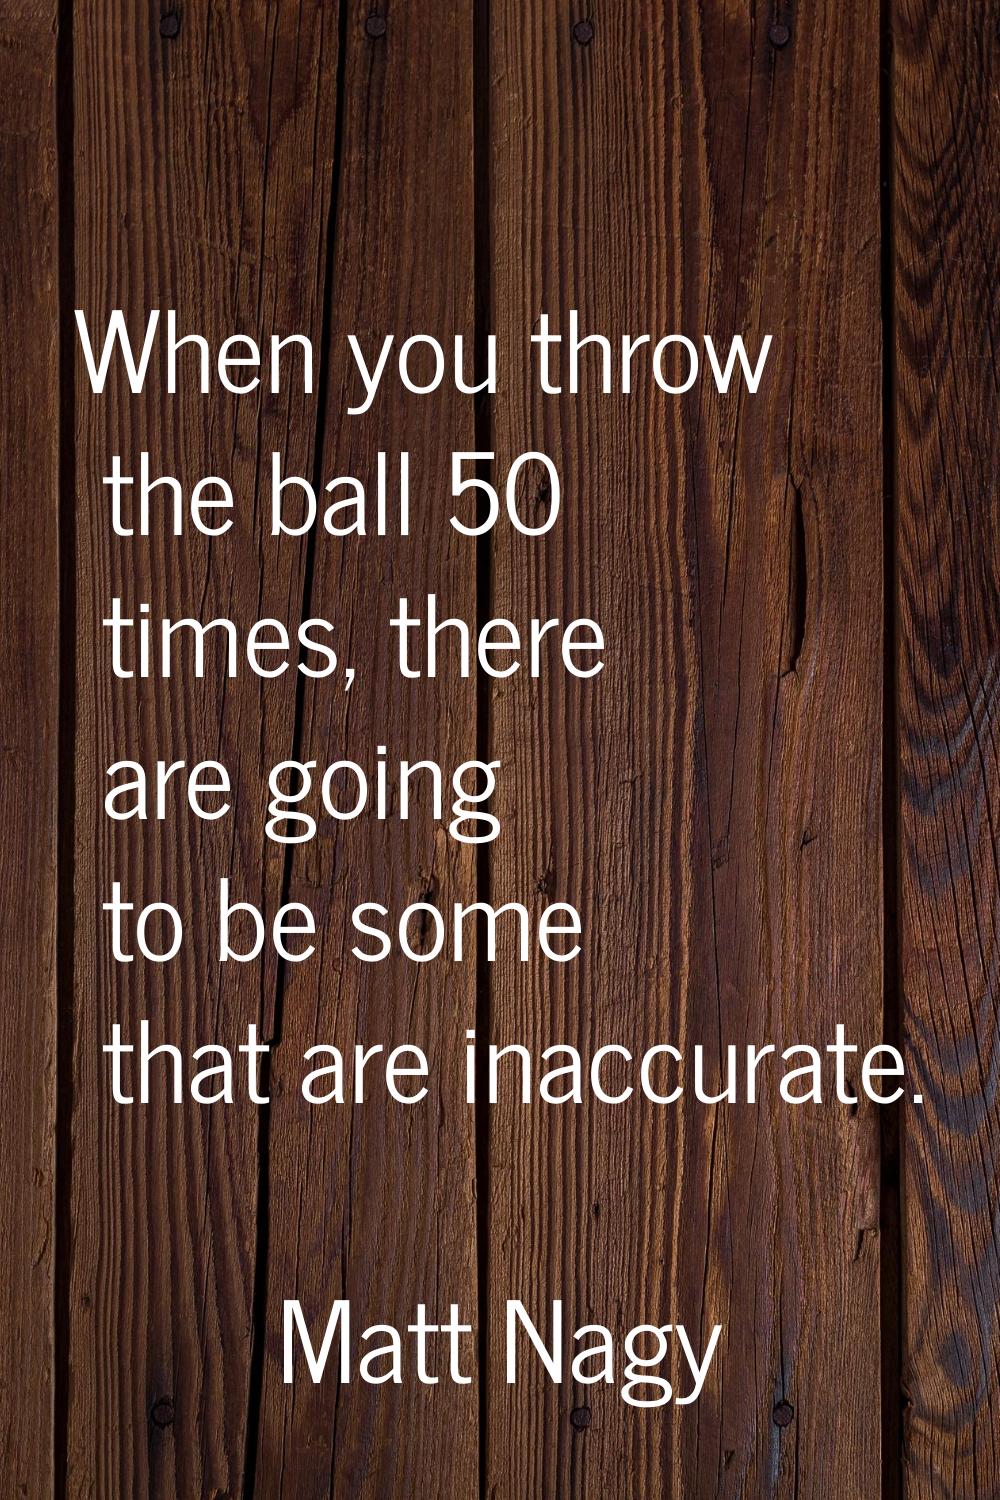 When you throw the ball 50 times, there are going to be some that are inaccurate.